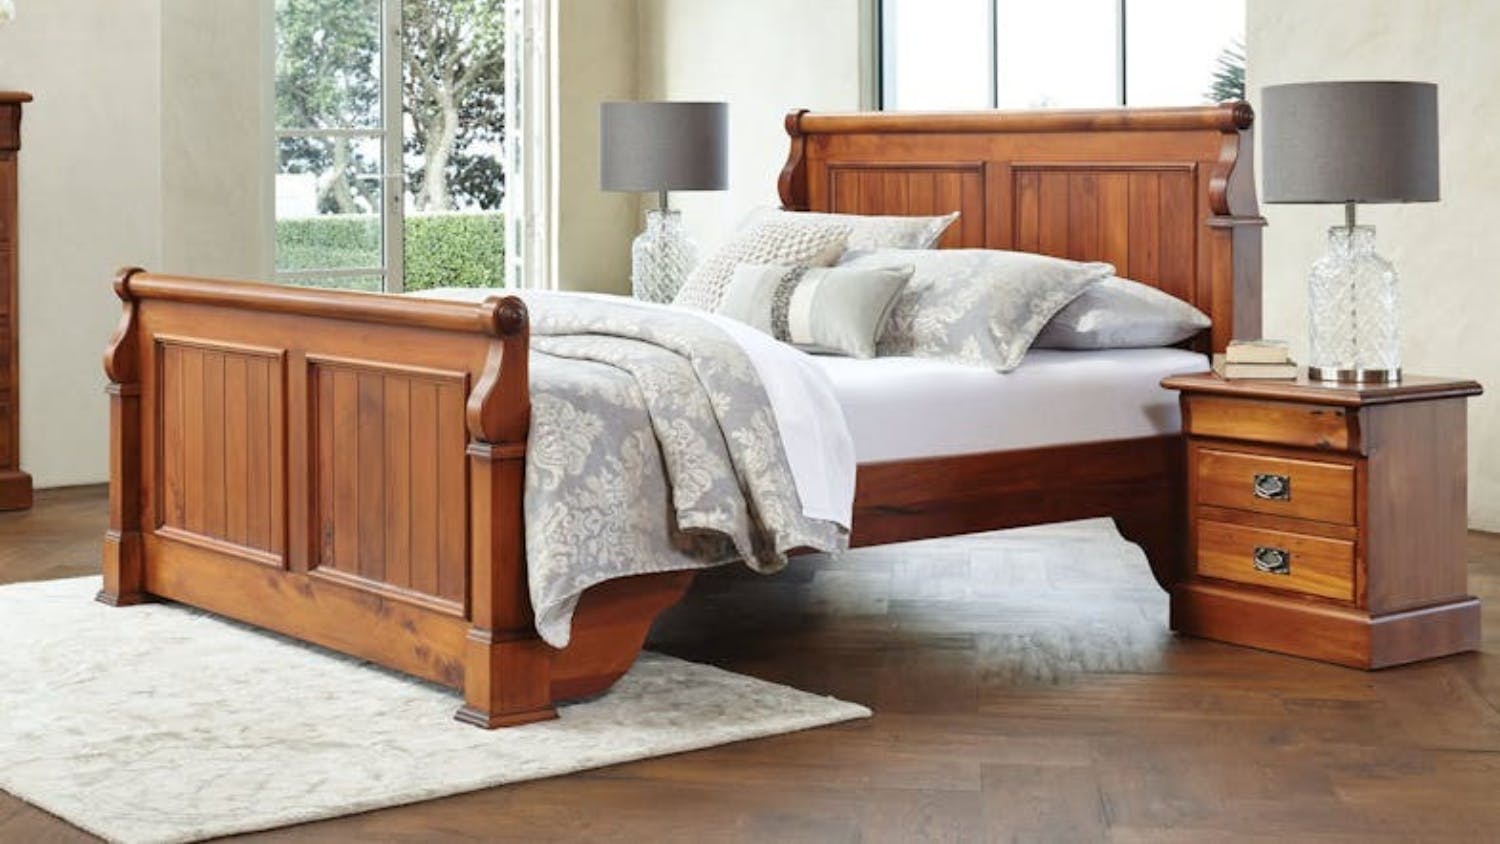 Clevedon Californian King 3 Piece Bedside Bedroom Suite - Tall